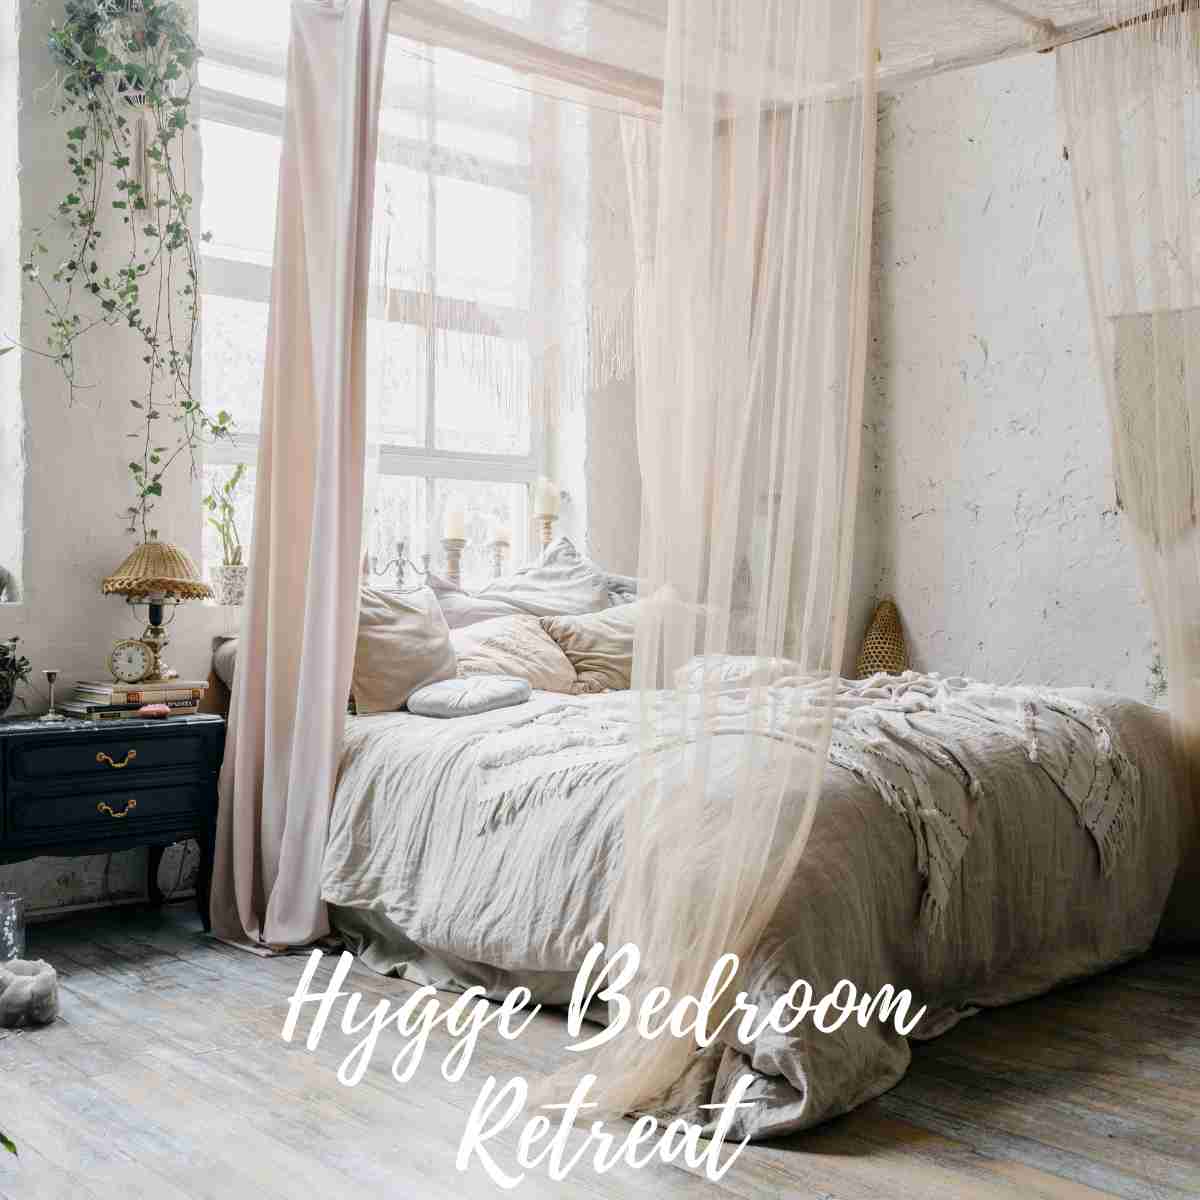 How to Create a Hygge Bedroom Retreat